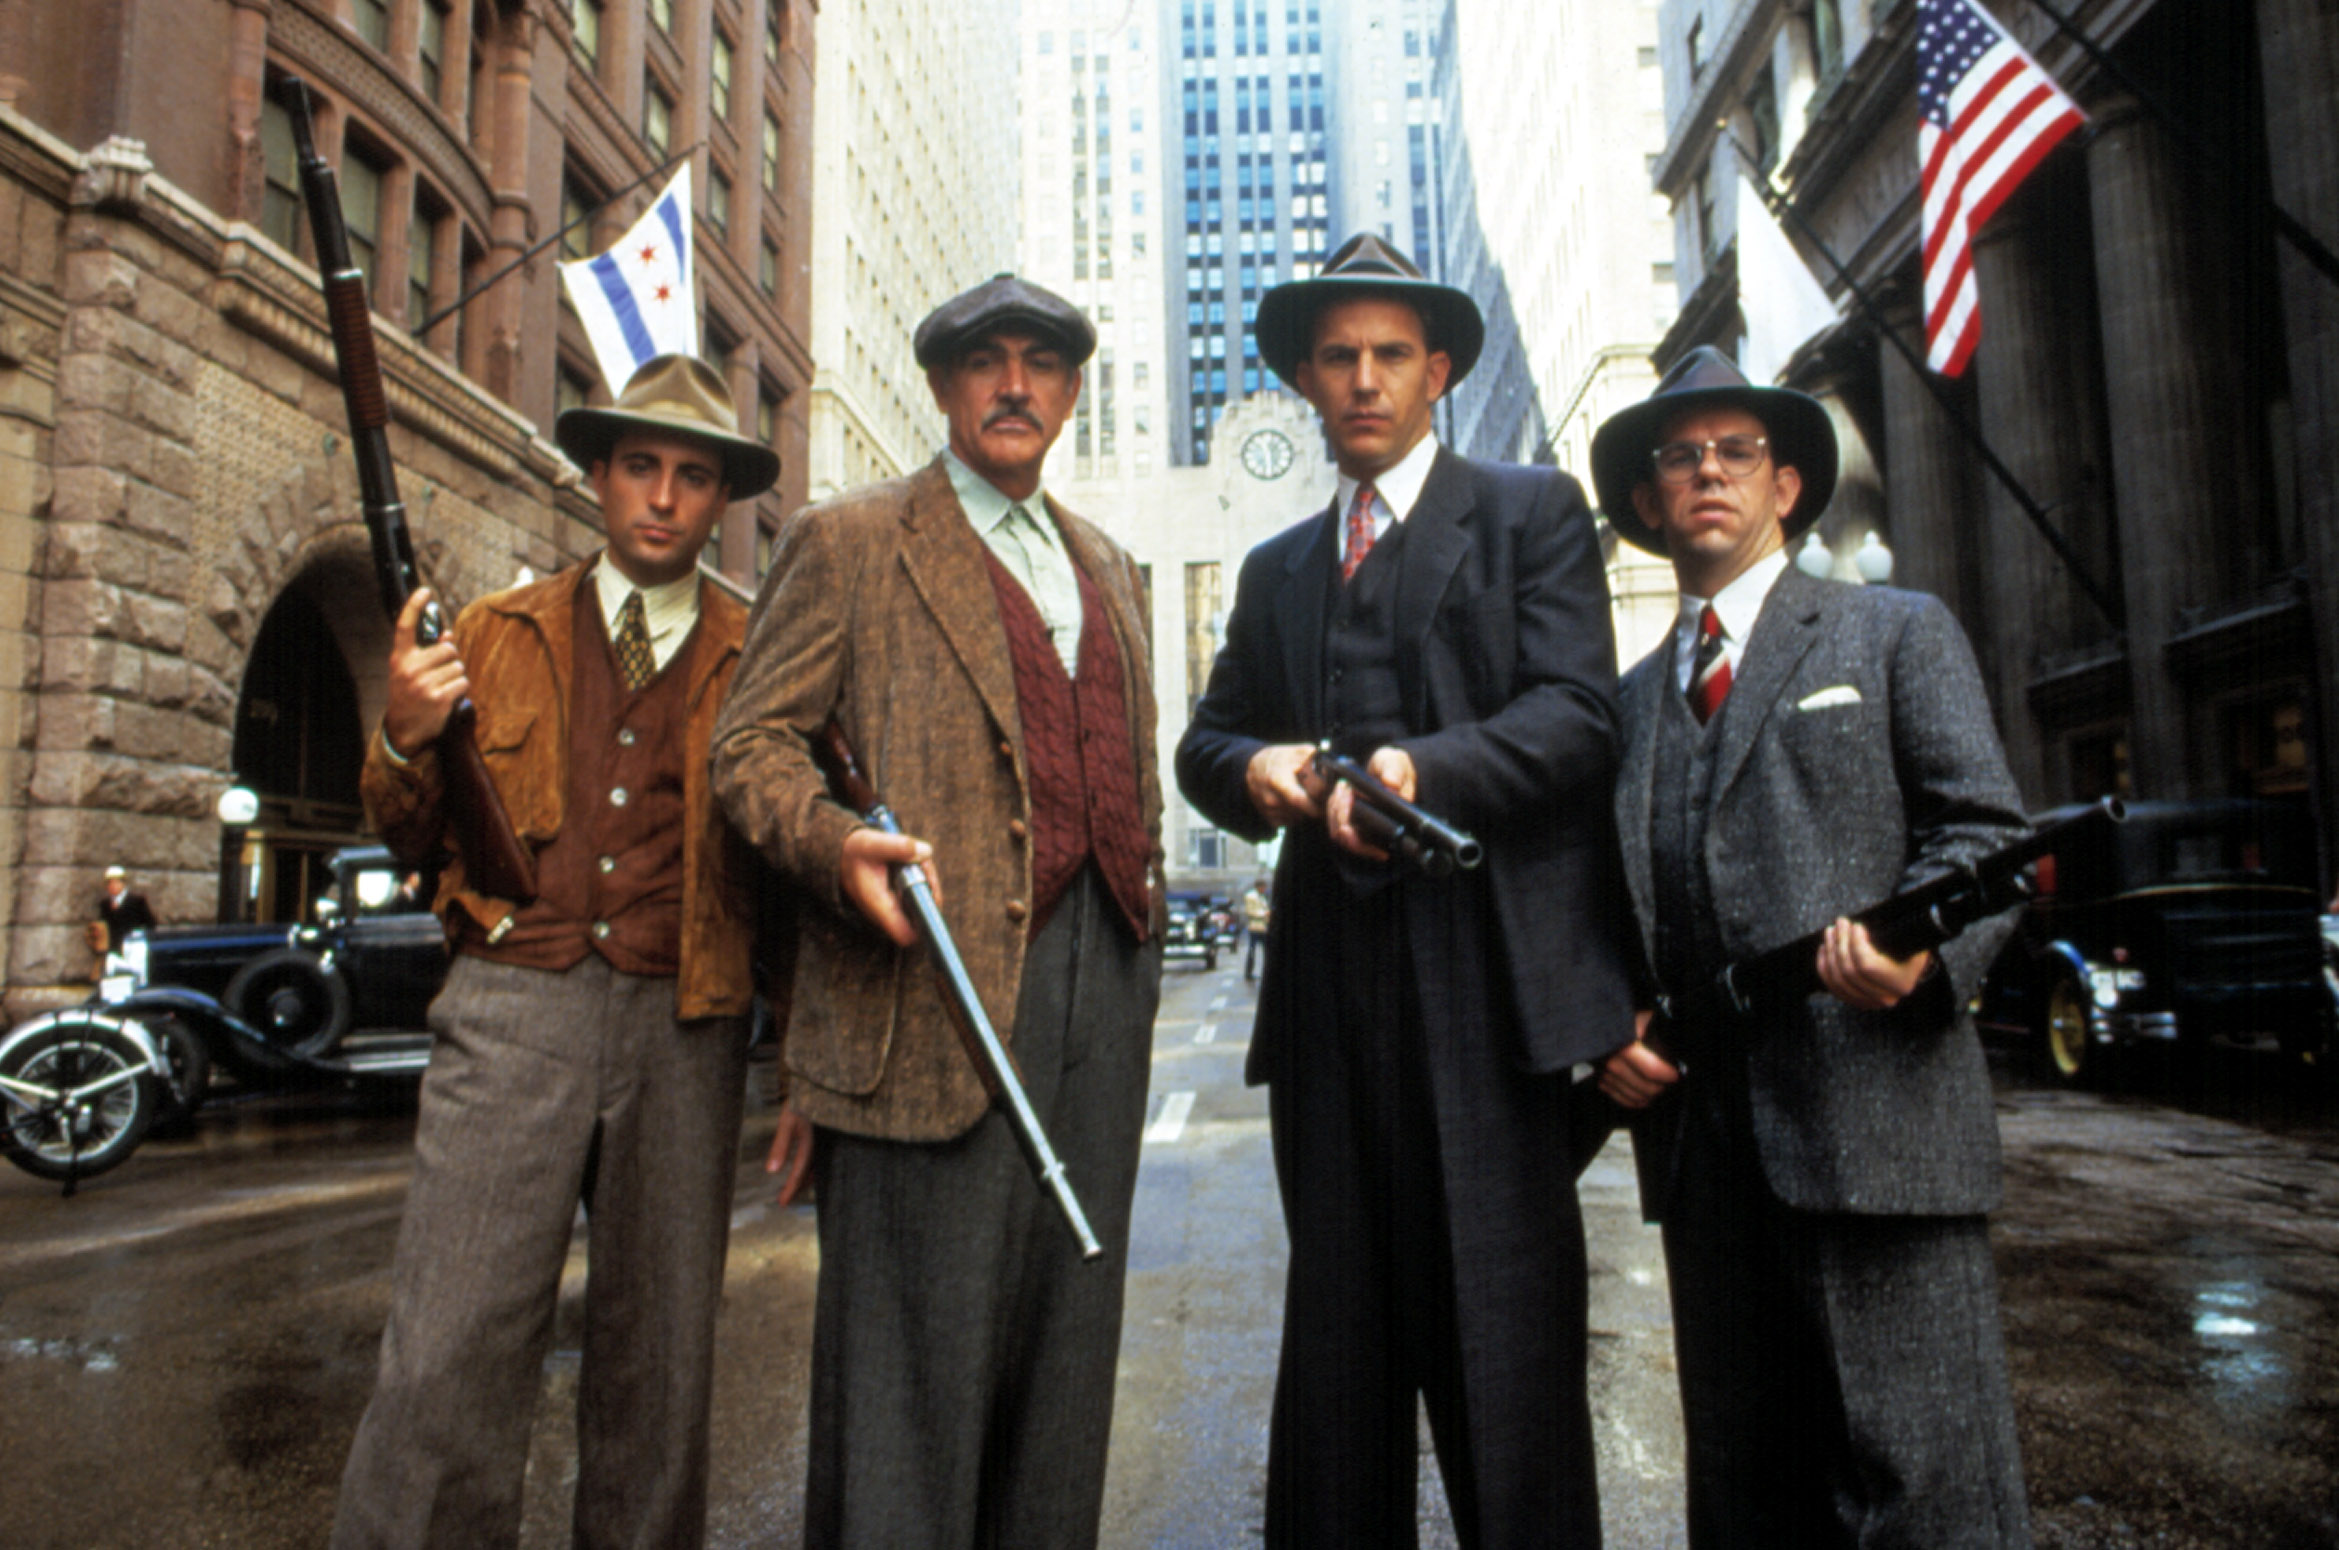 Gli intoccabili, The Untouchables, , Andy Garcia, Sean Connery, Kevin Costner, Charles Martin Smith, 1987. (c) Paramount Pictures/ Courtesy: Everett Collection